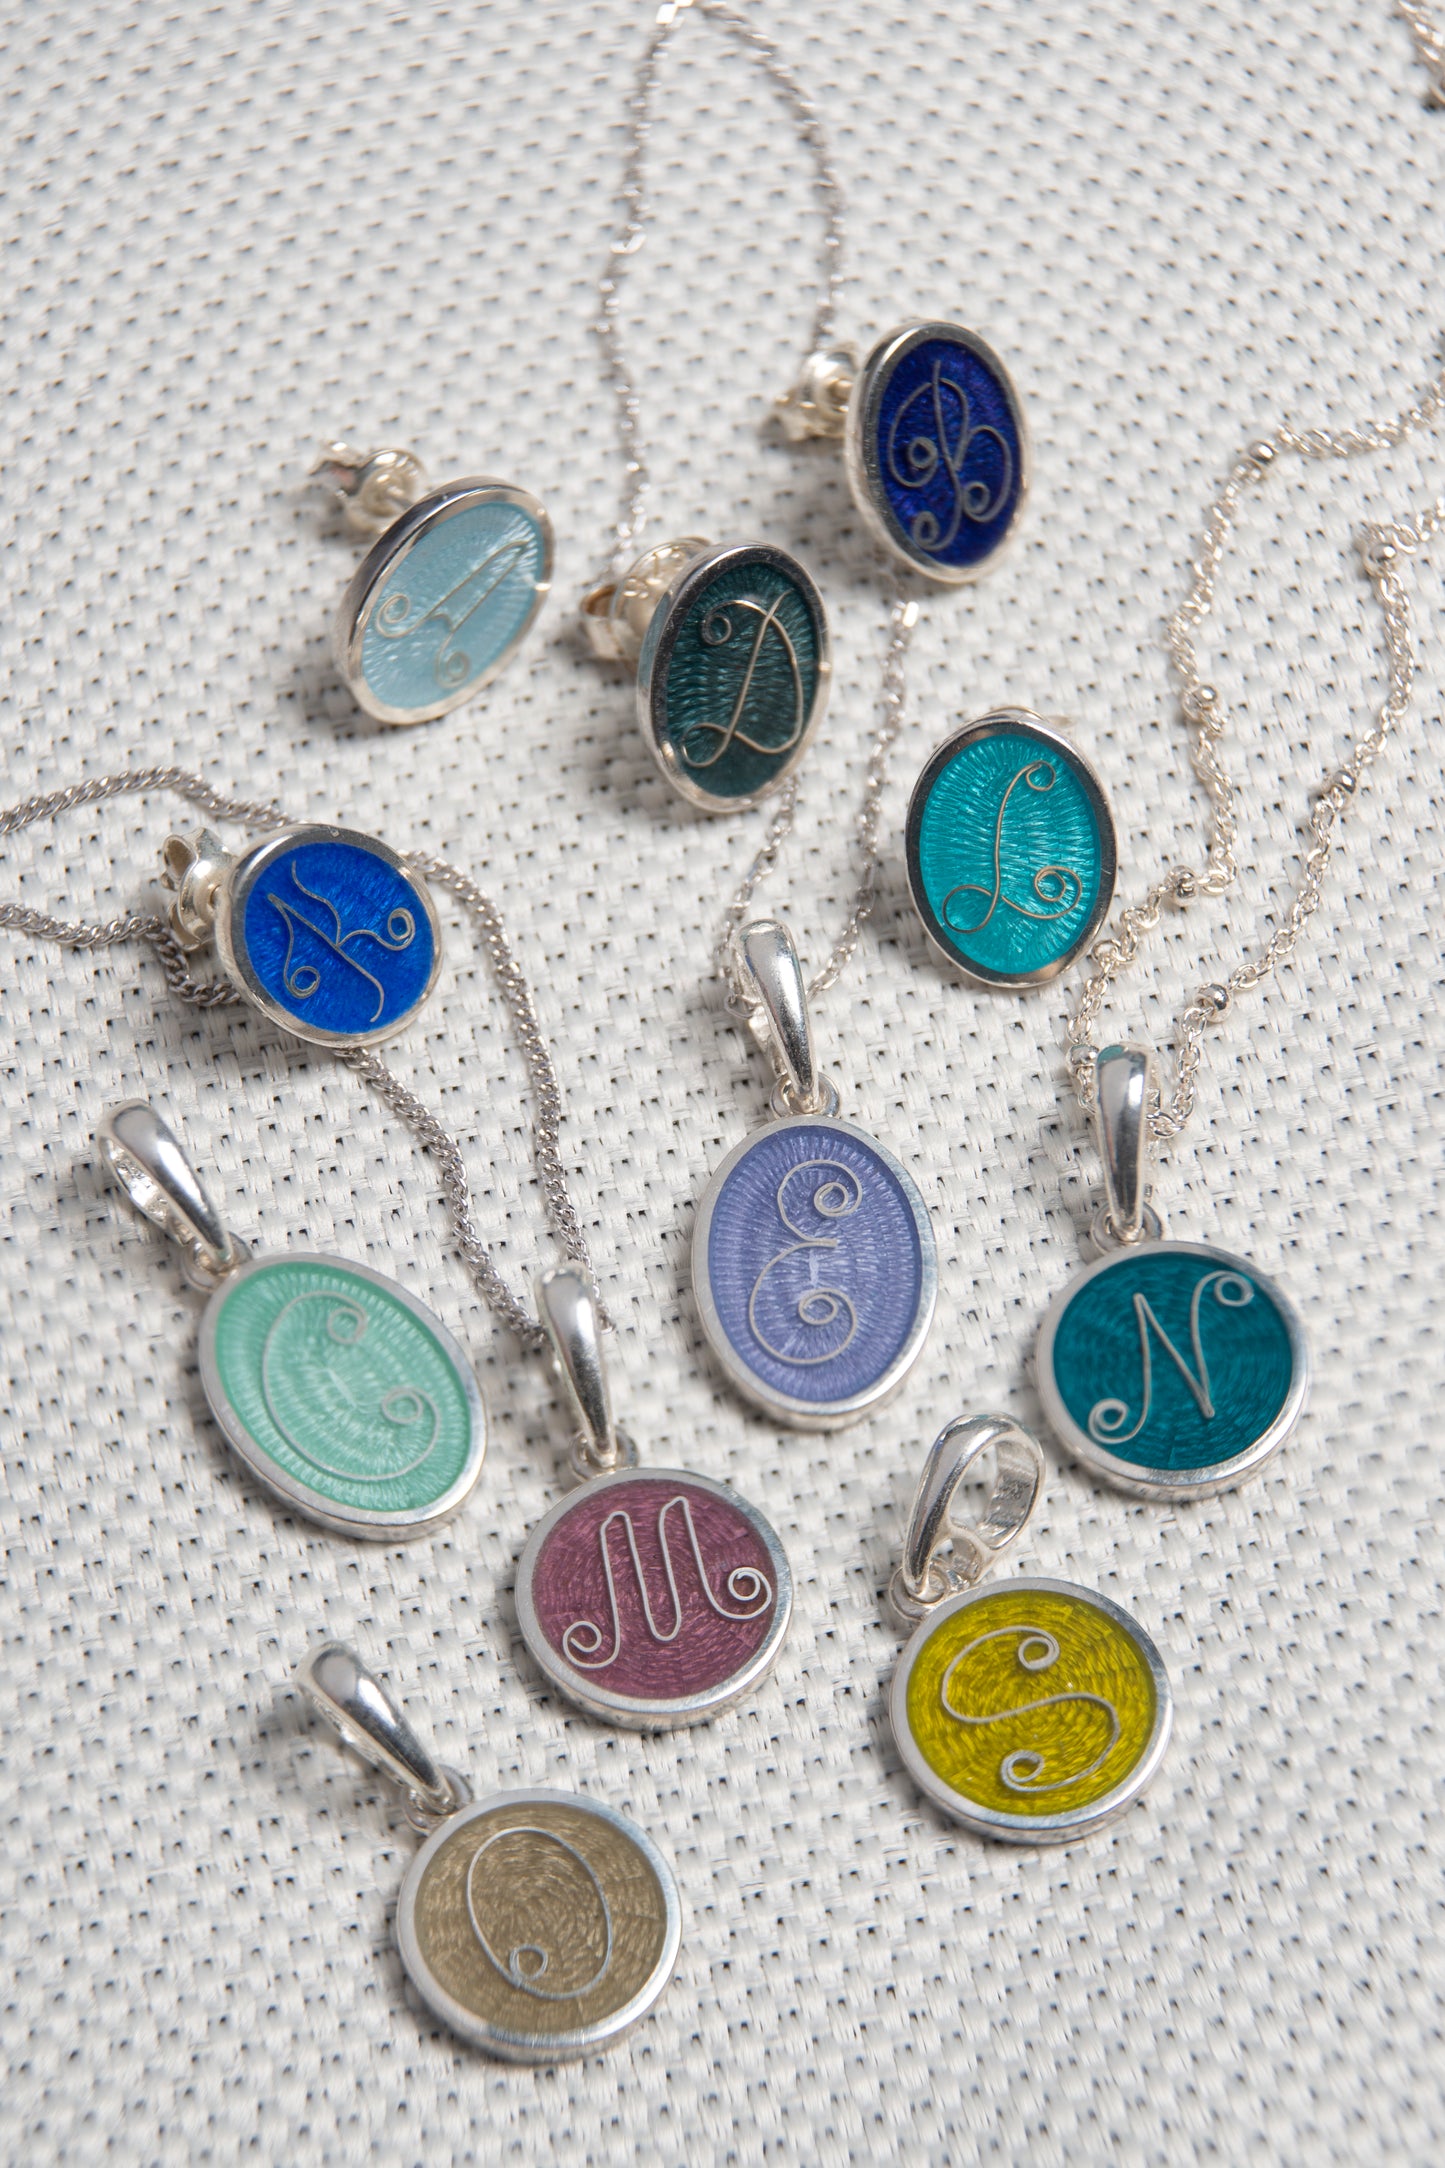 Initial Necklace, Cloisonne Enamel And Sterling Silver Pendant With Letters